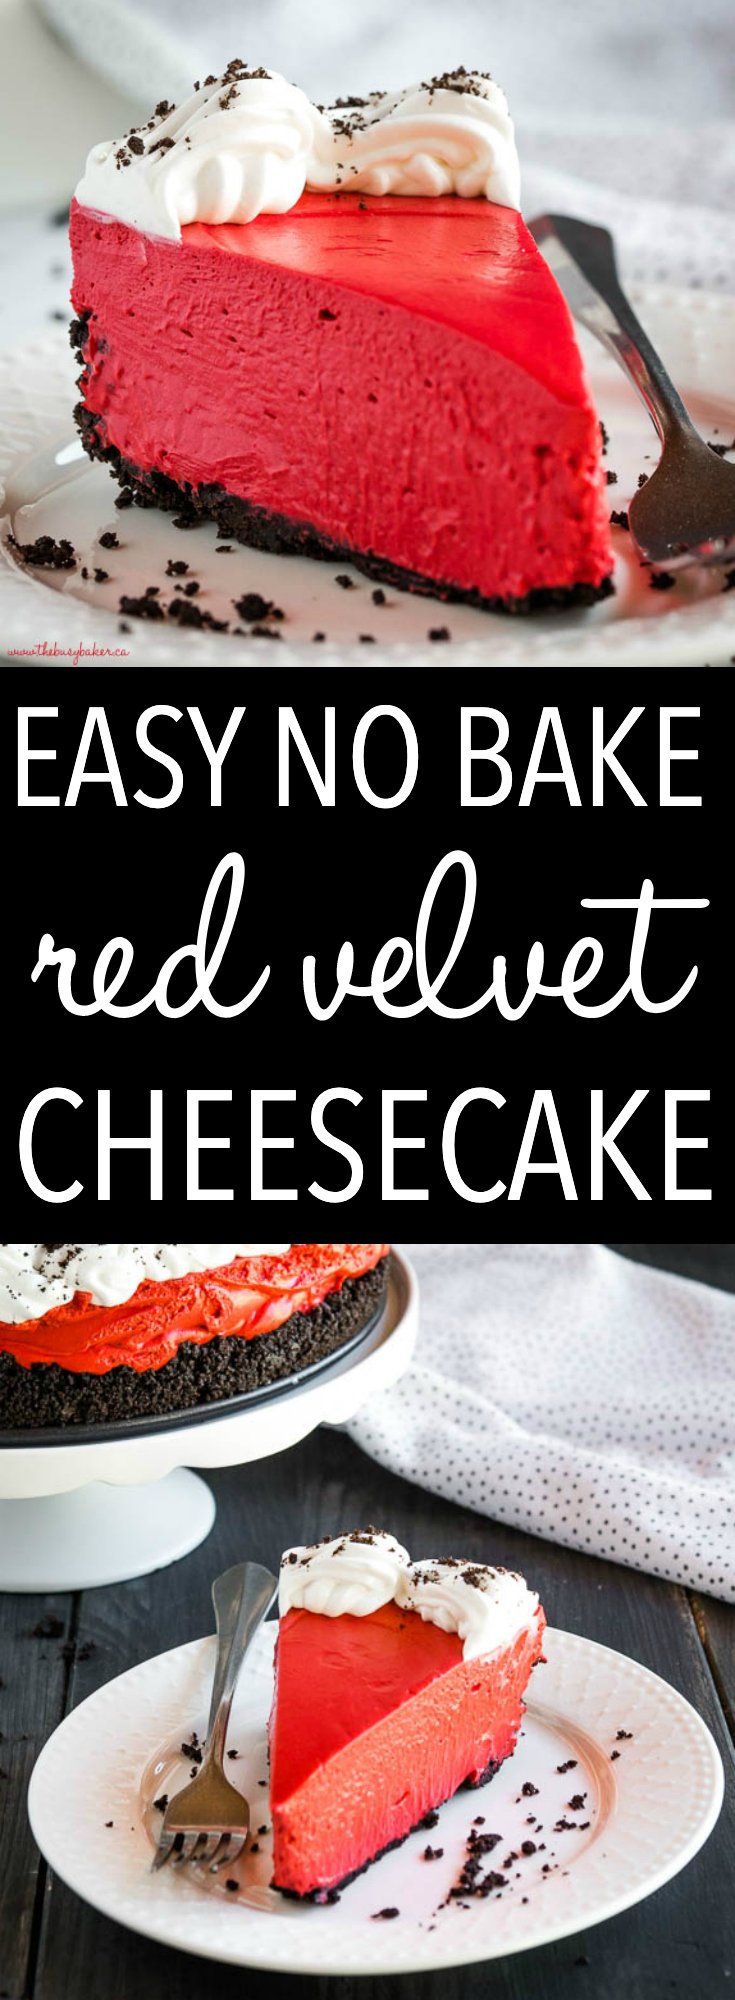 This Easy No Bake Red Velvet Cheesecake is the perfect simple dessert for Valentine's Day! It's creamy and smooth with a hint of chocolate and that classic Red Velvet flavour! Recipe from thebusybaker.ca! #redvelvet #cheesecake #cake #dessert #sweet #homemade #classicrecipe #recipe #easyrecipe #creamy via @busybakerblog